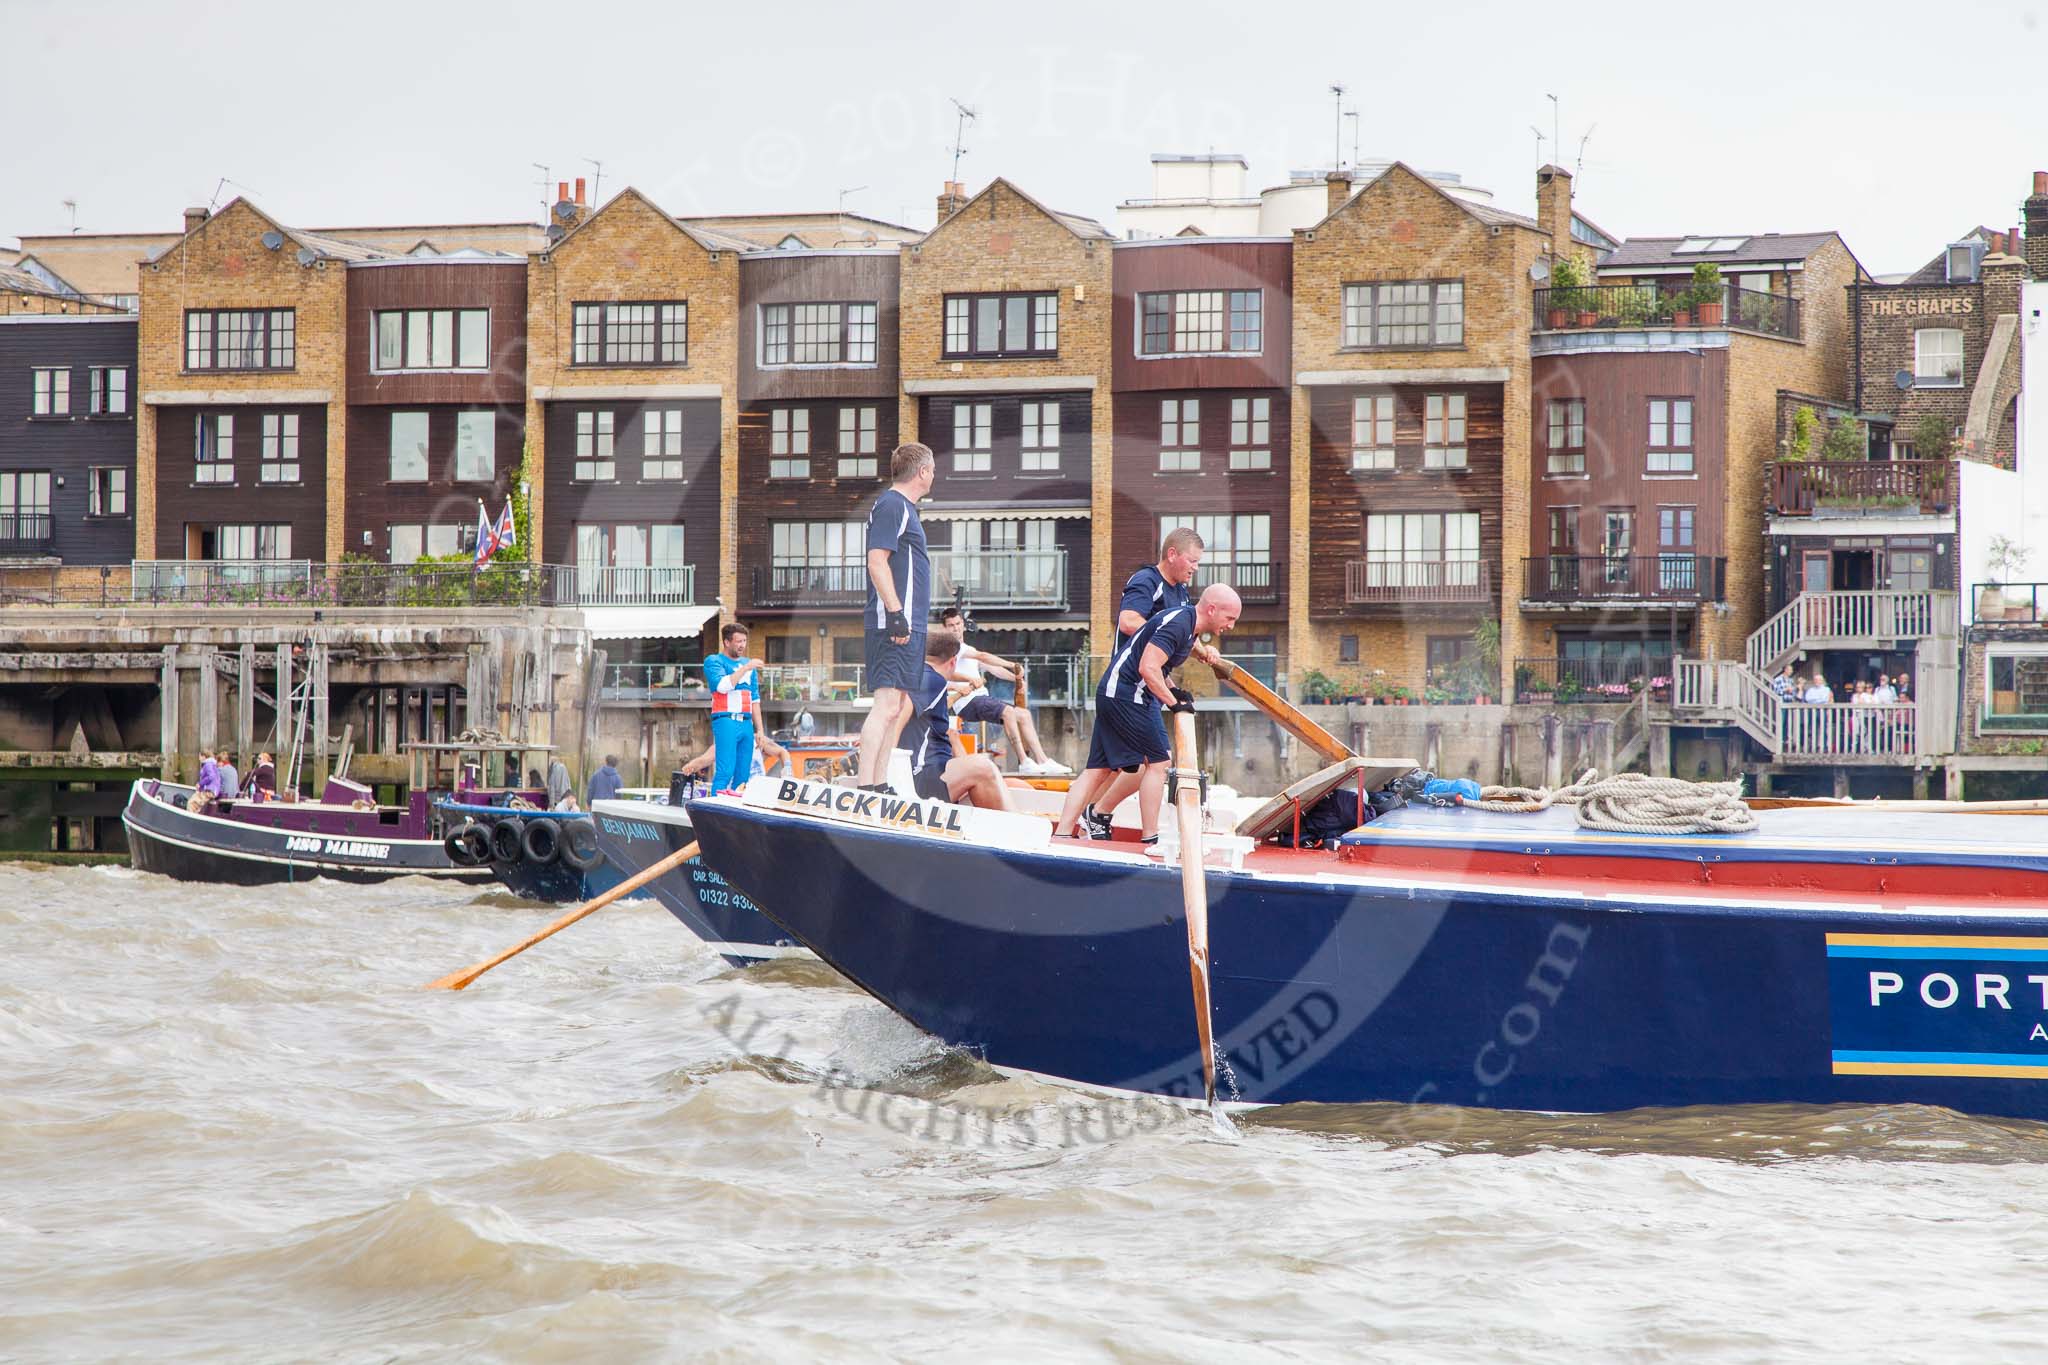 TOW River Thames Barge Driving Race 2014.
River Thames between Greenwich and Westminster,
London,

United Kingdom,
on 28 June 2014 at 12:57, image #172